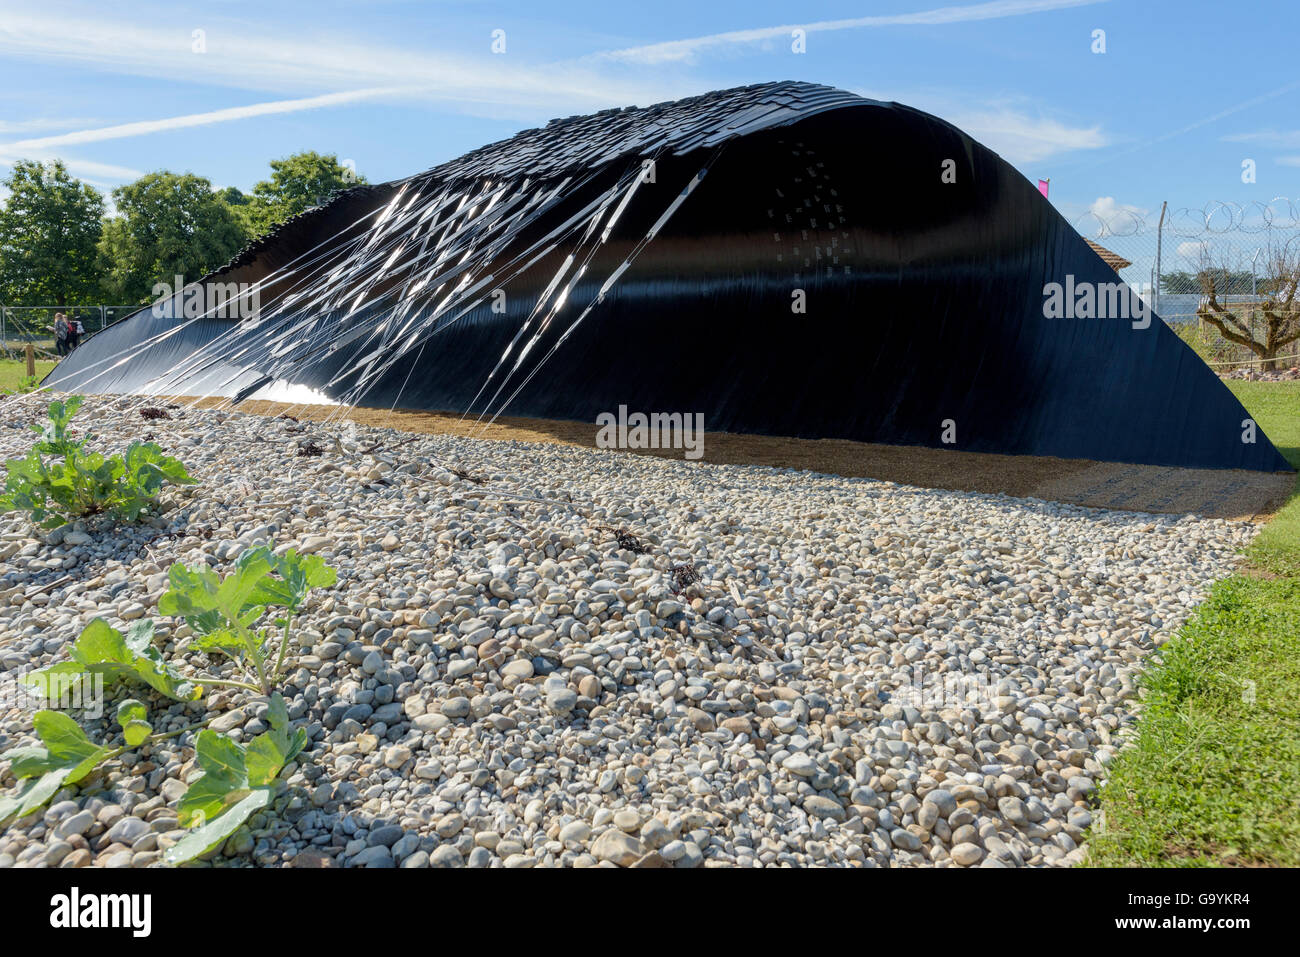 The Our Lives in Time's Hands conceptual Garden designed by Mark Whyte and Abigail Ferguson at the RHS Annual Hampton Court Palace Flower Show, Hampton, England, UK. July 4, 2016 Credit:  P Tomlins/Alamy Live News Stock Photo